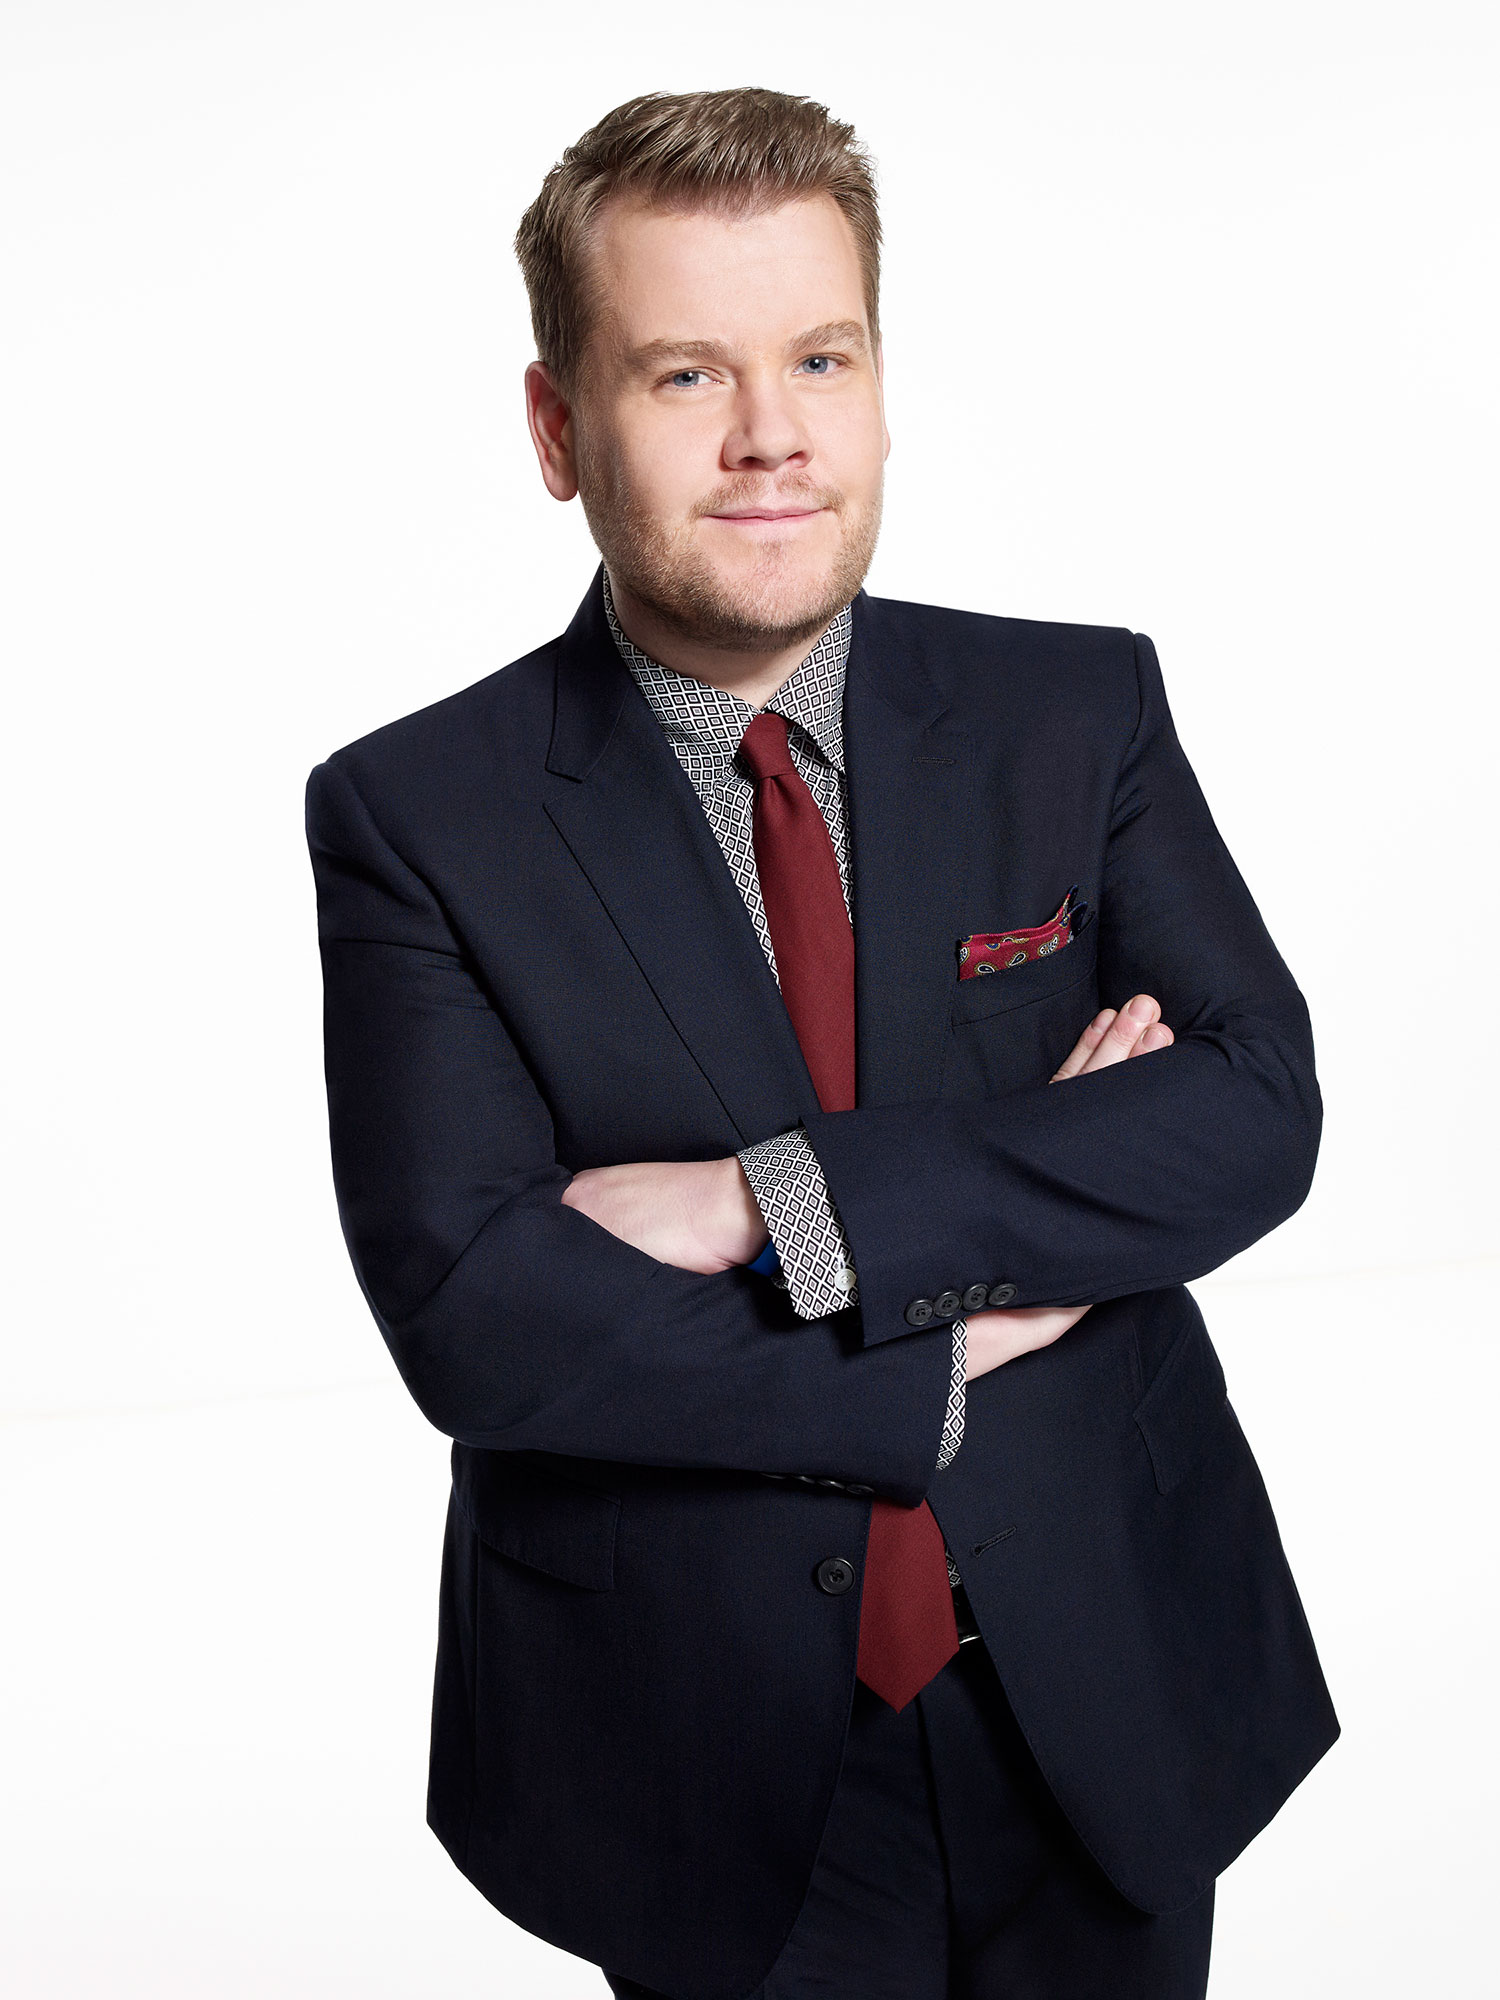 James Corden Tests Positive for COVID-19